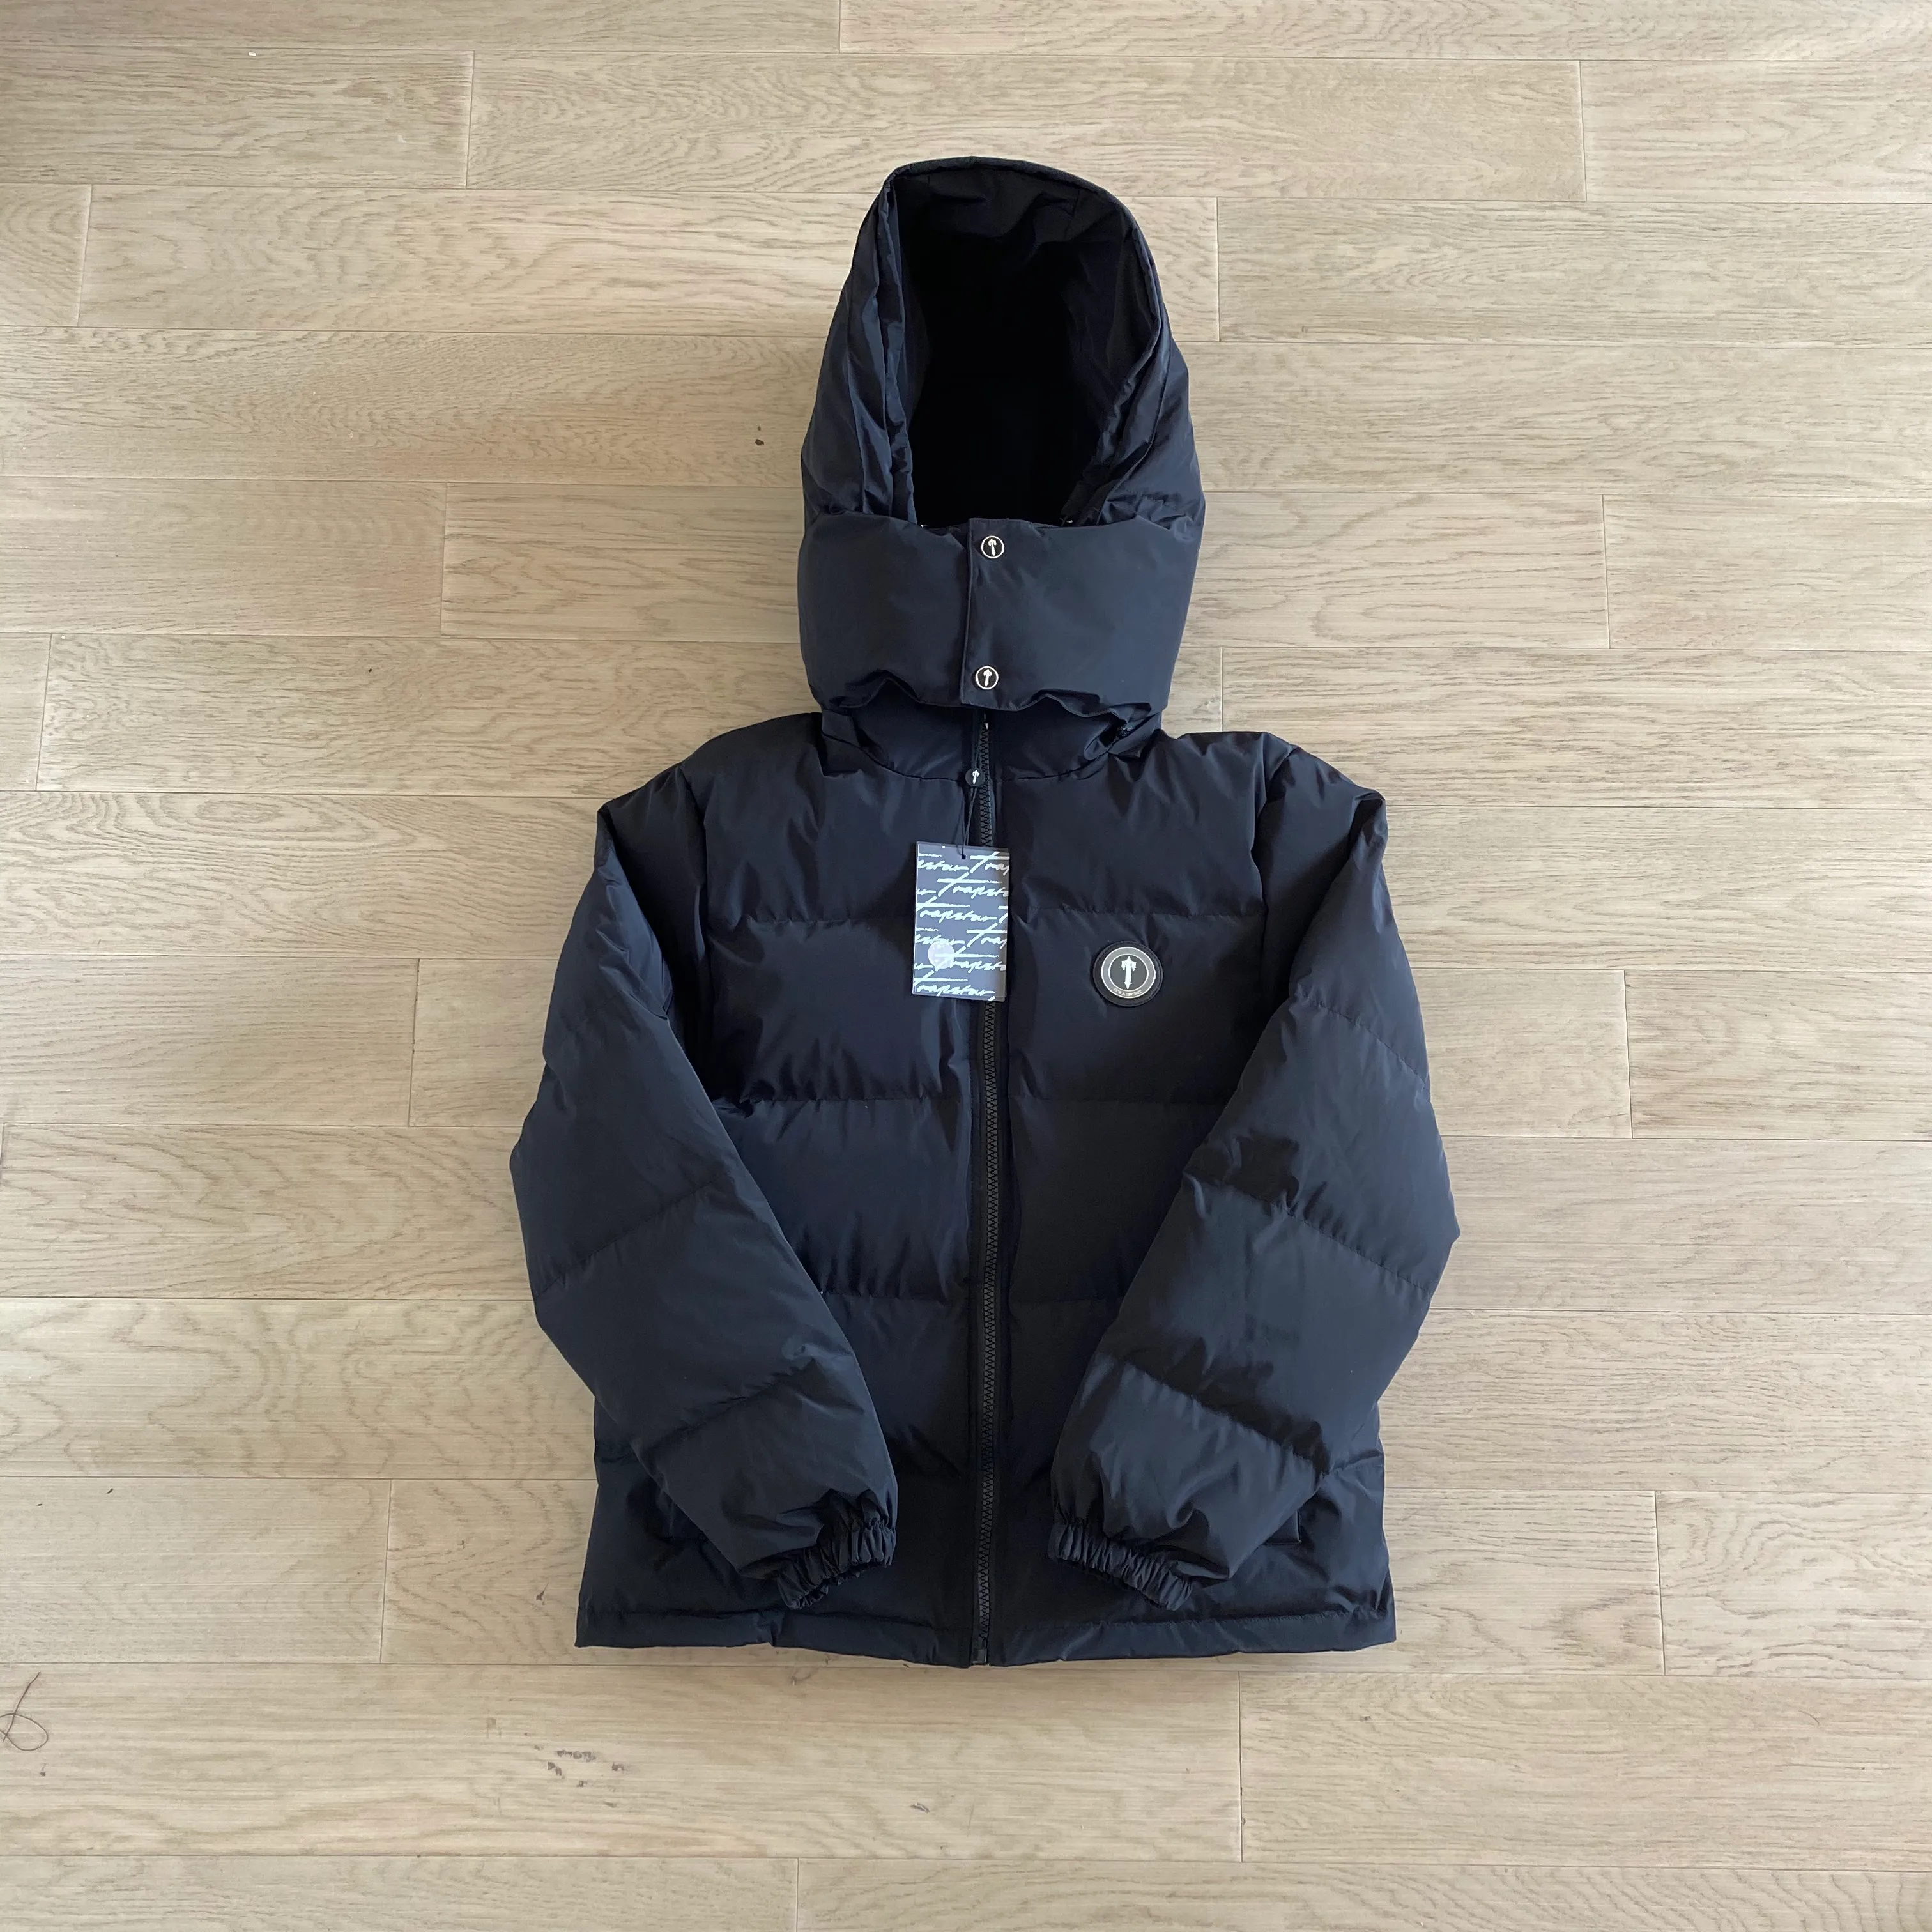 Trapstar Irongate pufferjacket with Detachable Hood (Black)